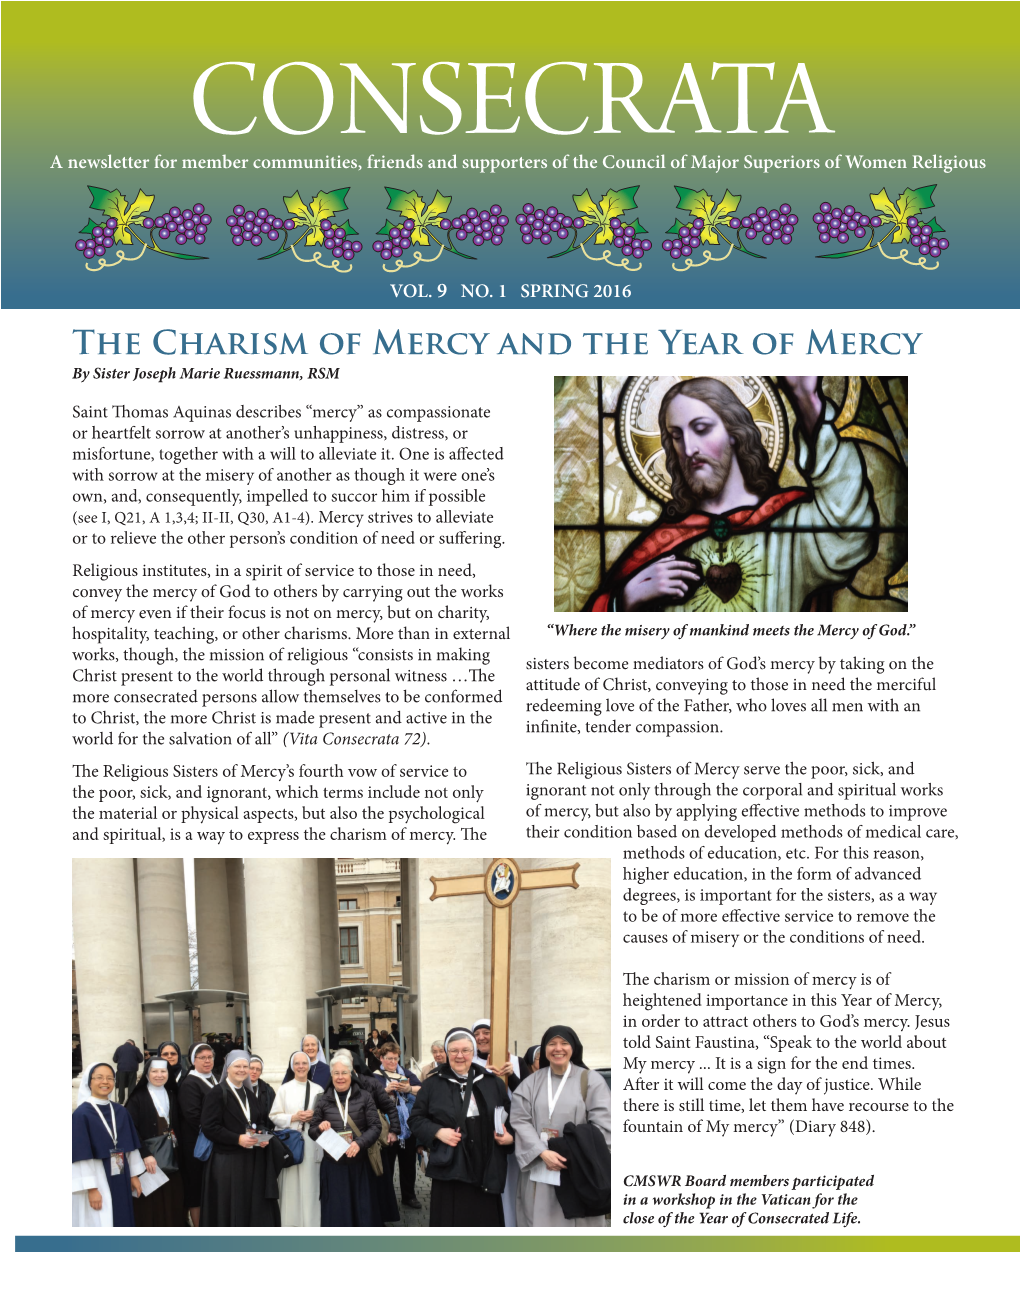 The Charism of Mercy and the Year of Mercy by Sister Joseph Marie Ruessmann, RSM